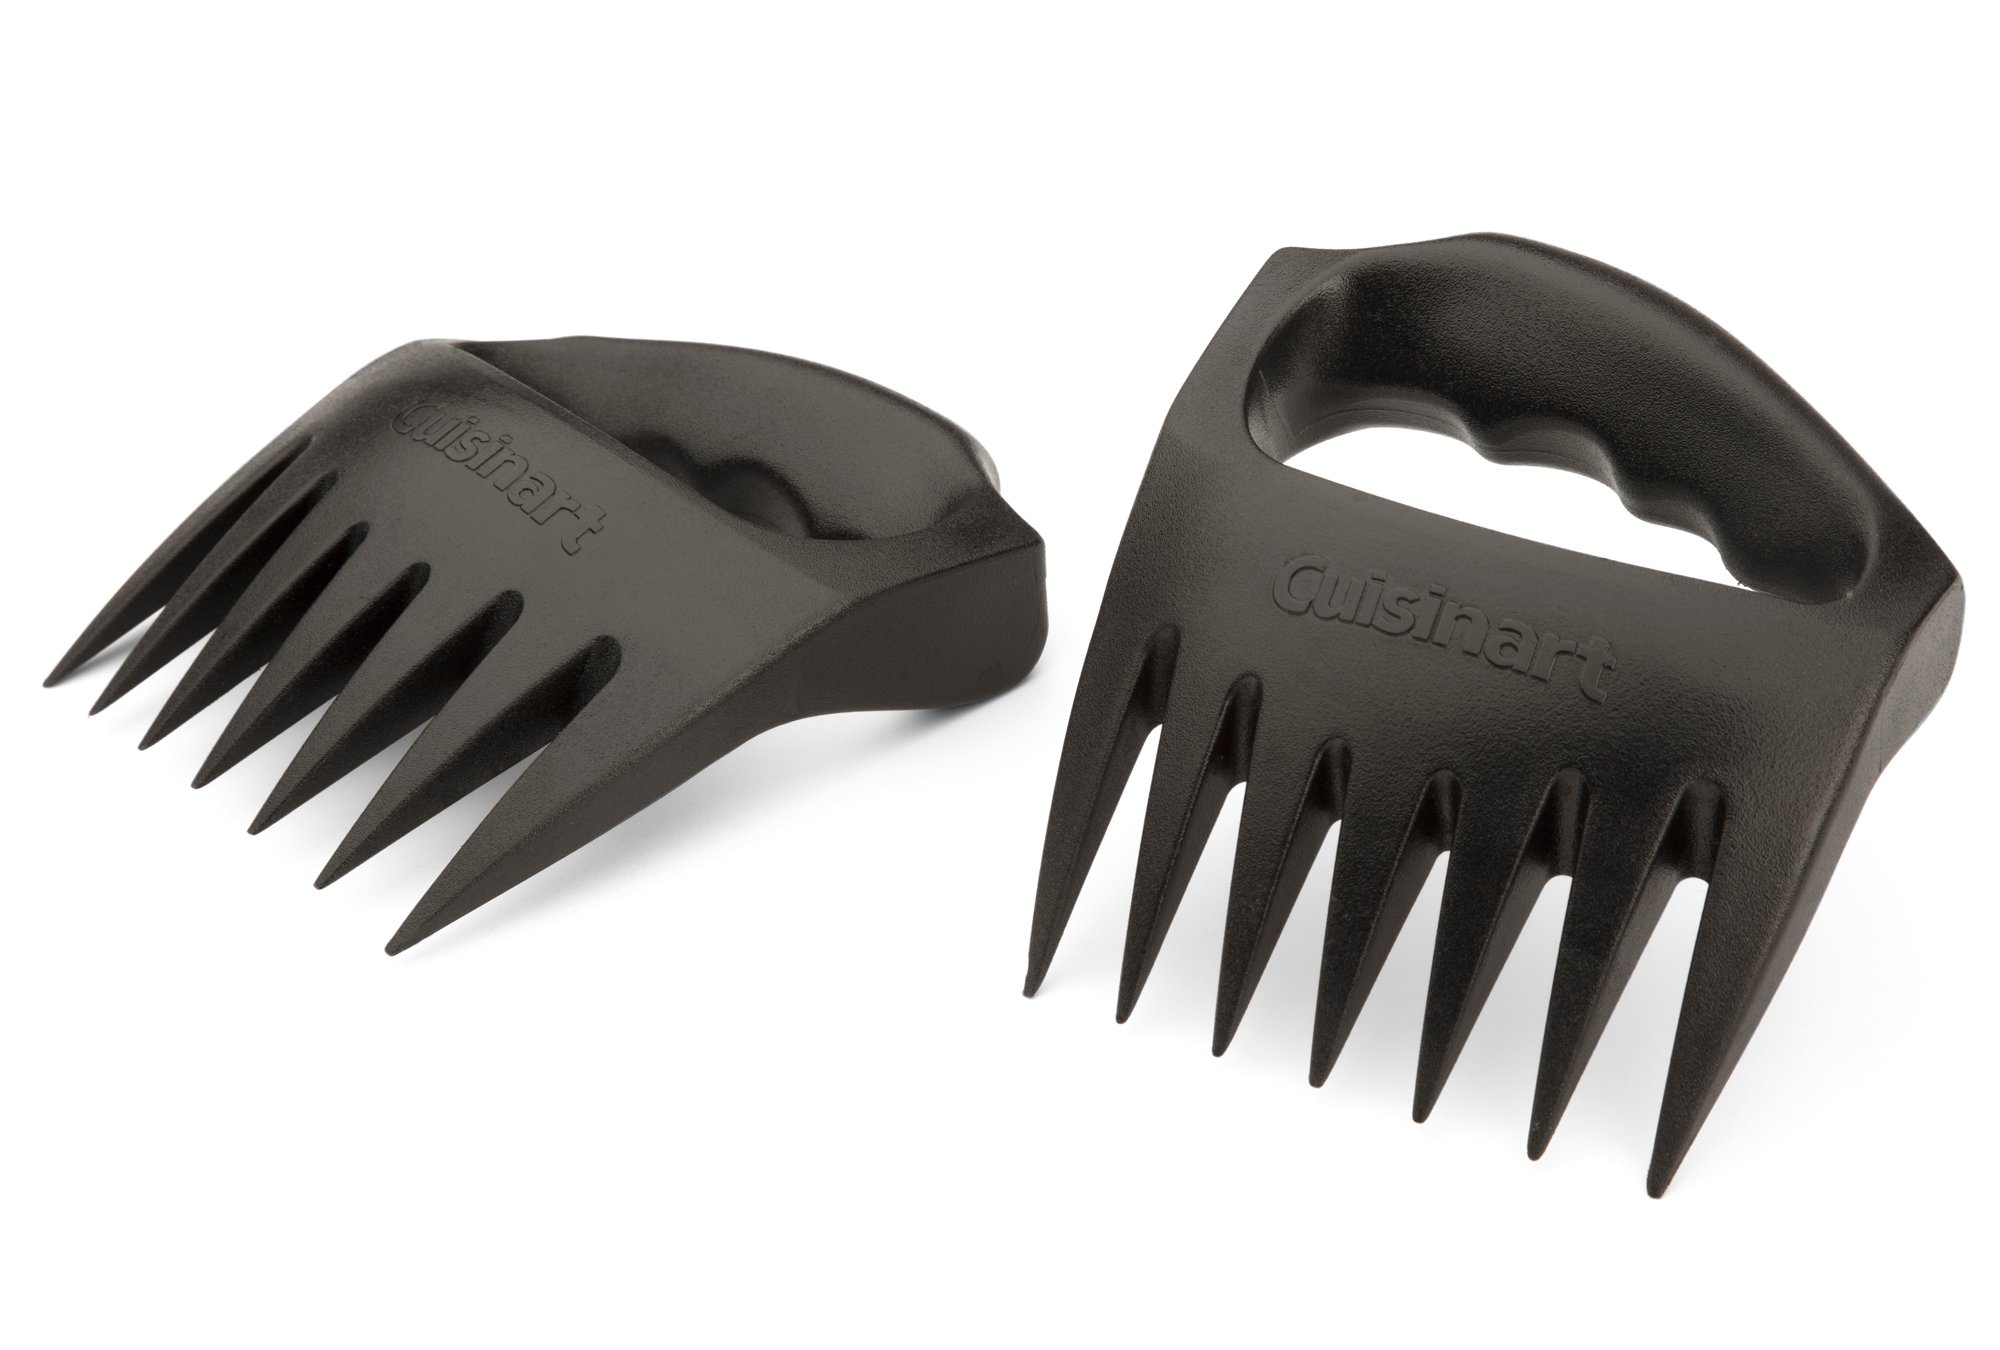 Shredding Claws - Quality Grilling Tools and Accessories 